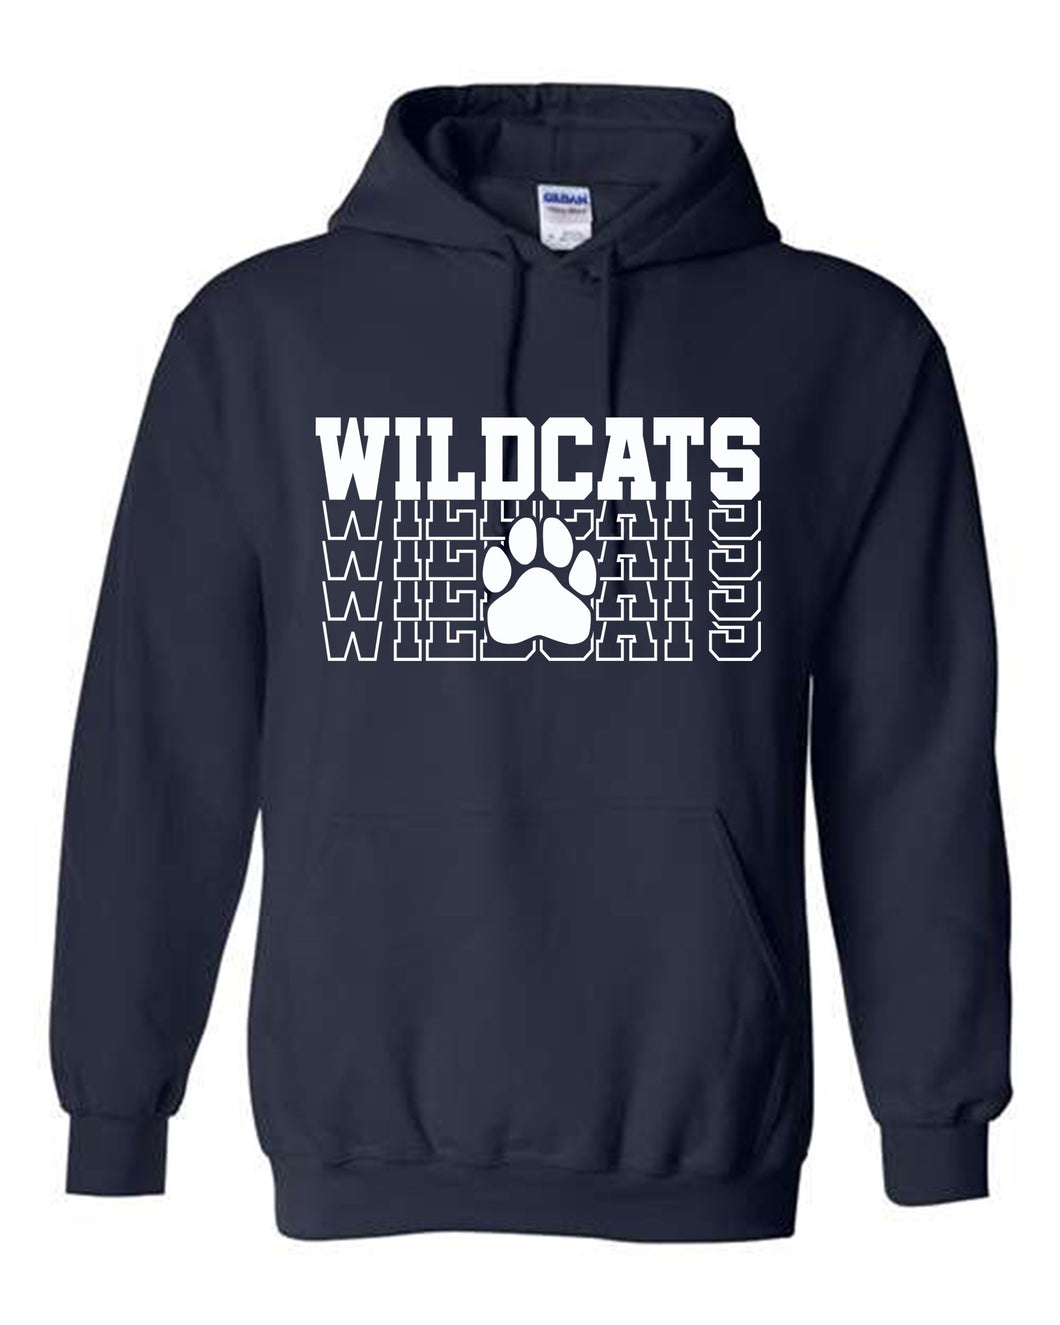 Wildcats Repeat Hoodie (Youth and Adult)